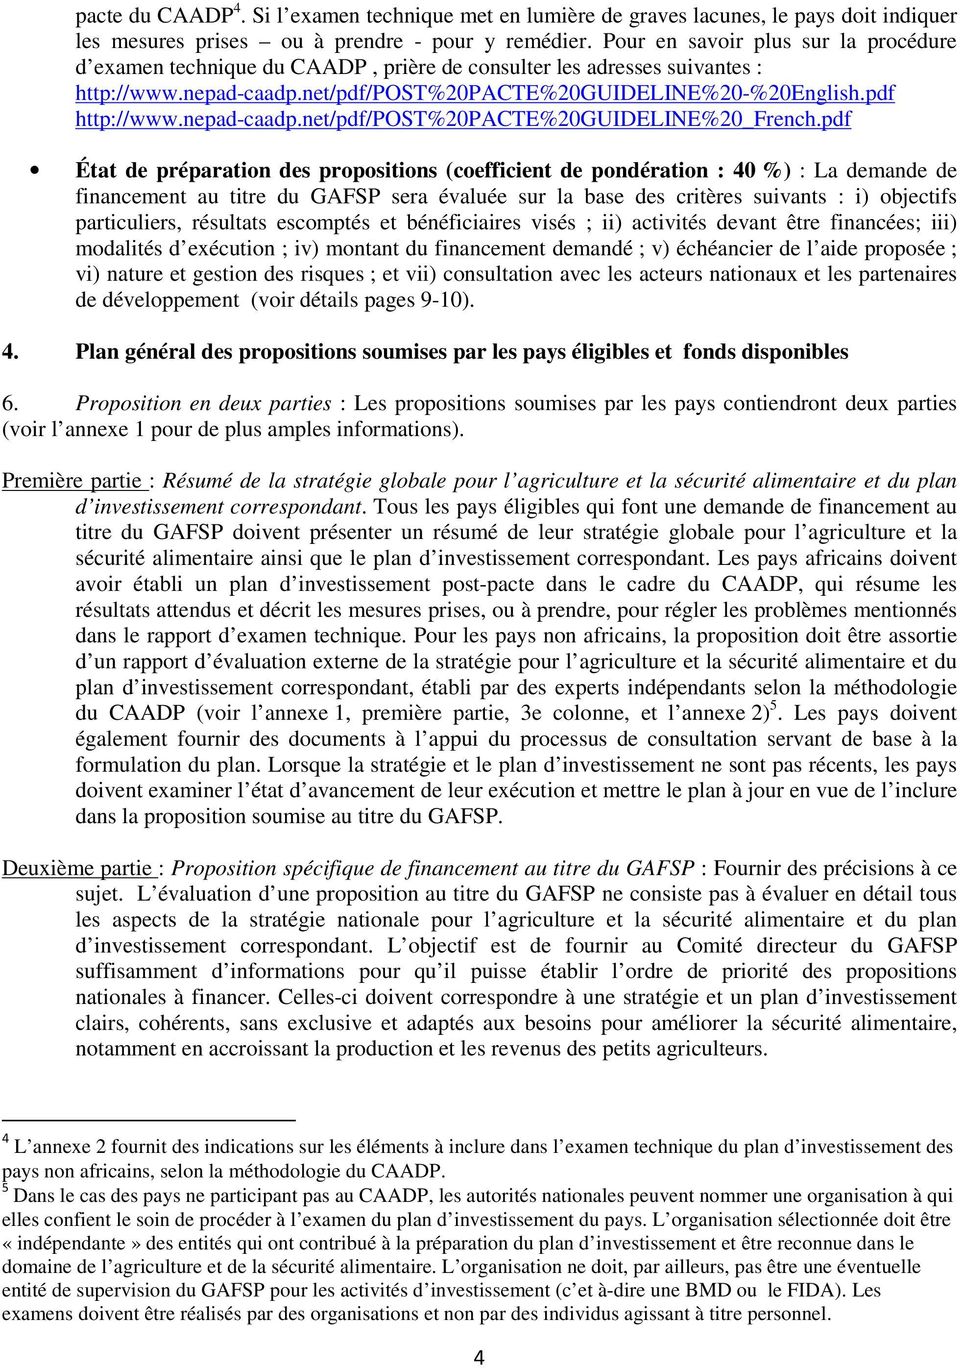 nepad-caadp.net/pdf/post%20pacte%20guideline%20_french.